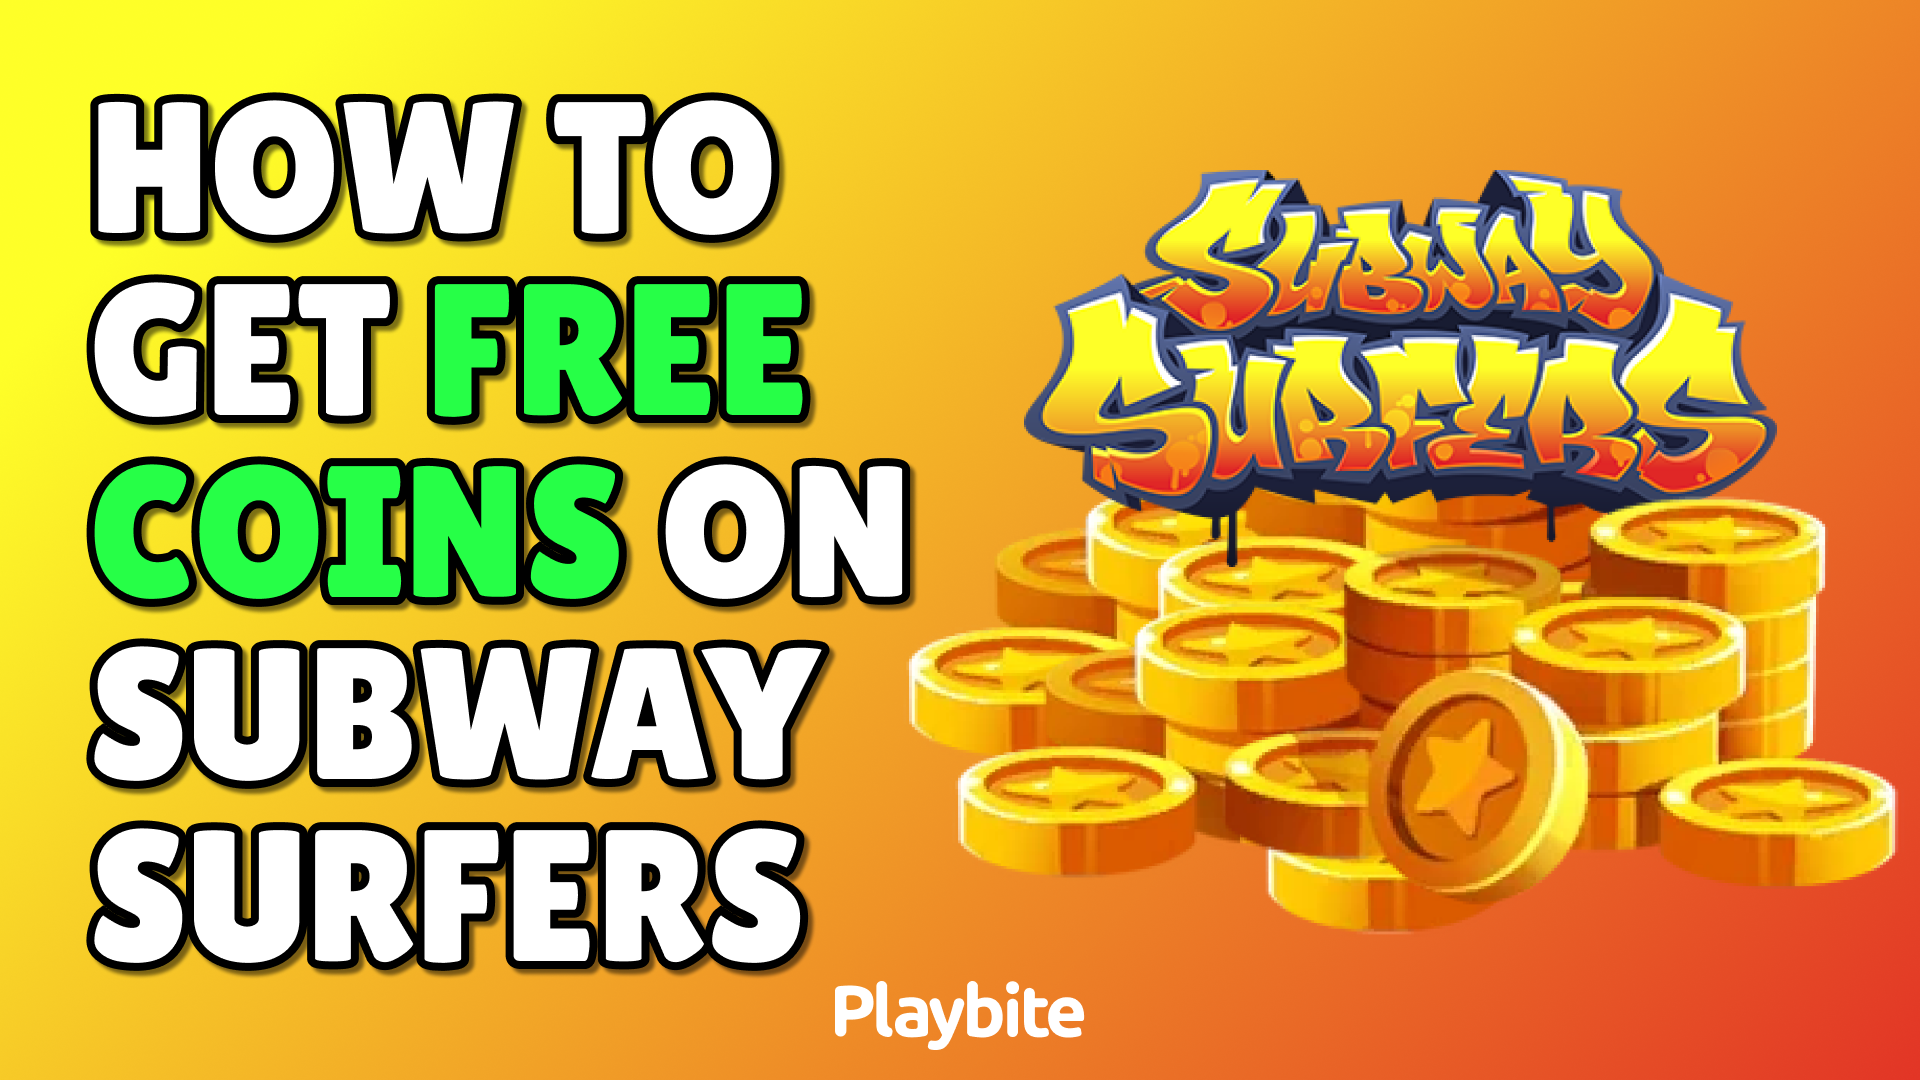 How To Get Free Coins On Subway Surfers